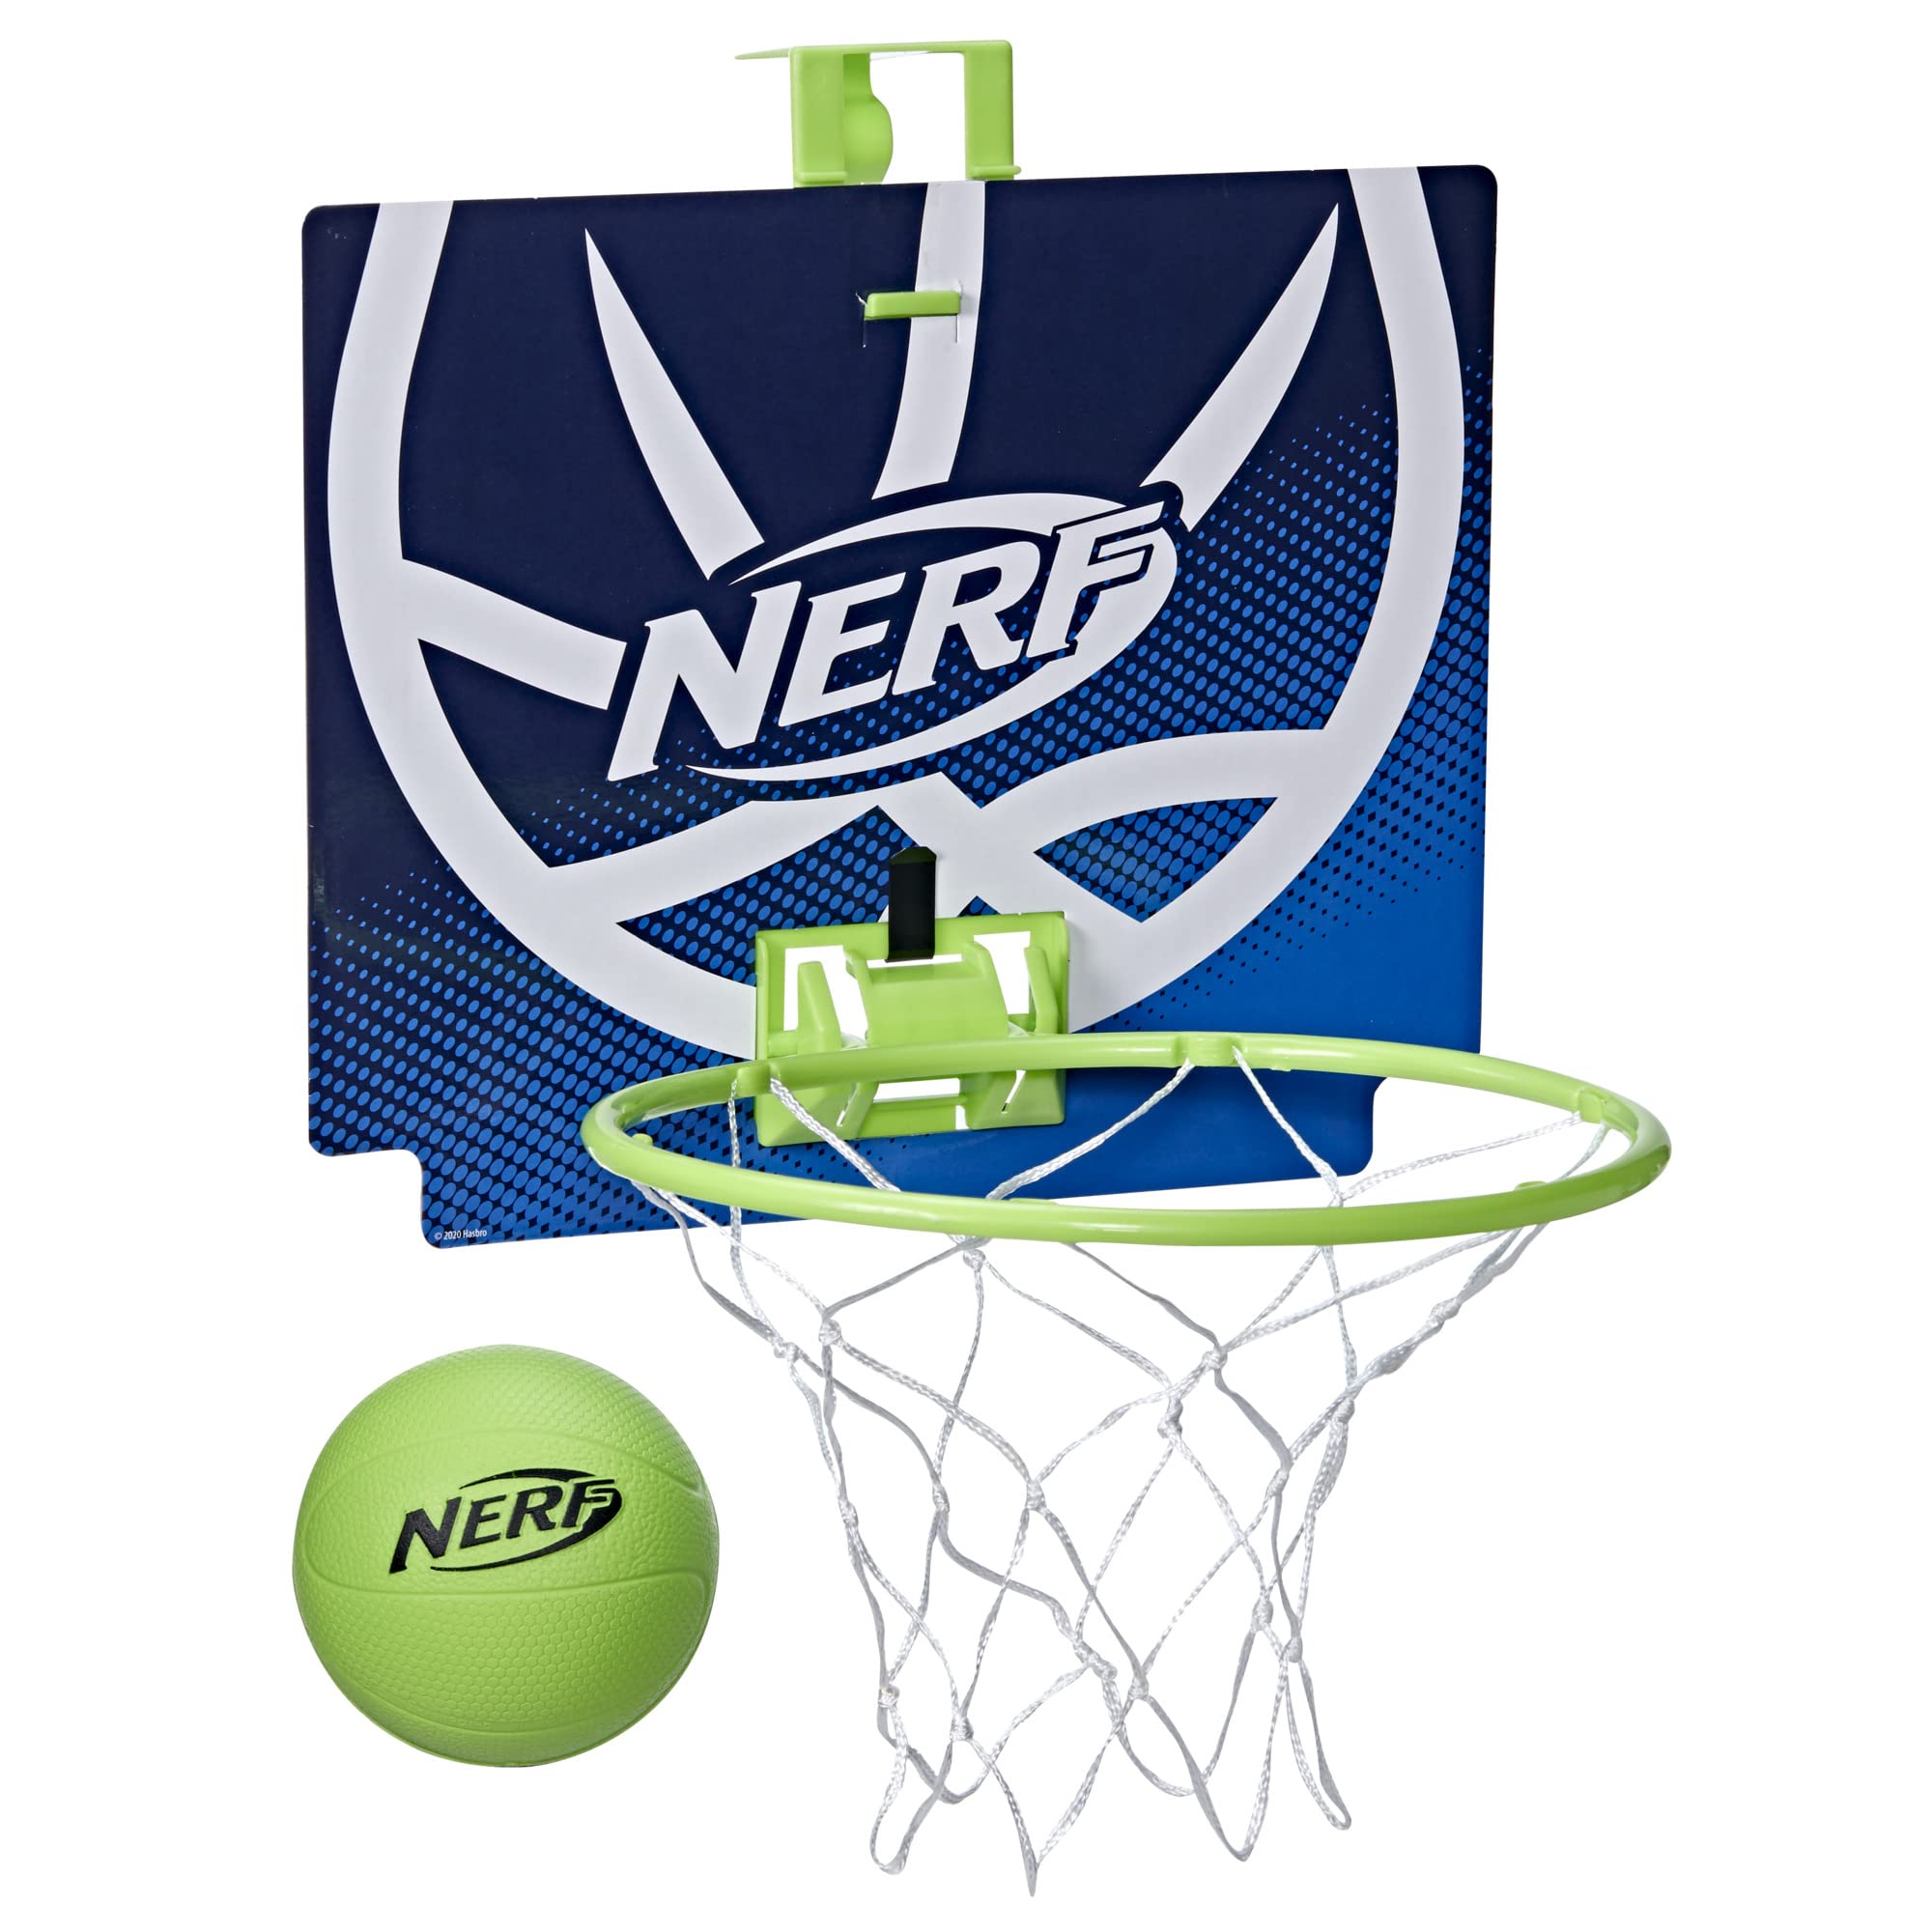 NERF Nerfoop - The Classic Mini Foam Basketball and Hoop - Hooks On Doors - Indoor and Outdoor Play - A Favorite Since 1972